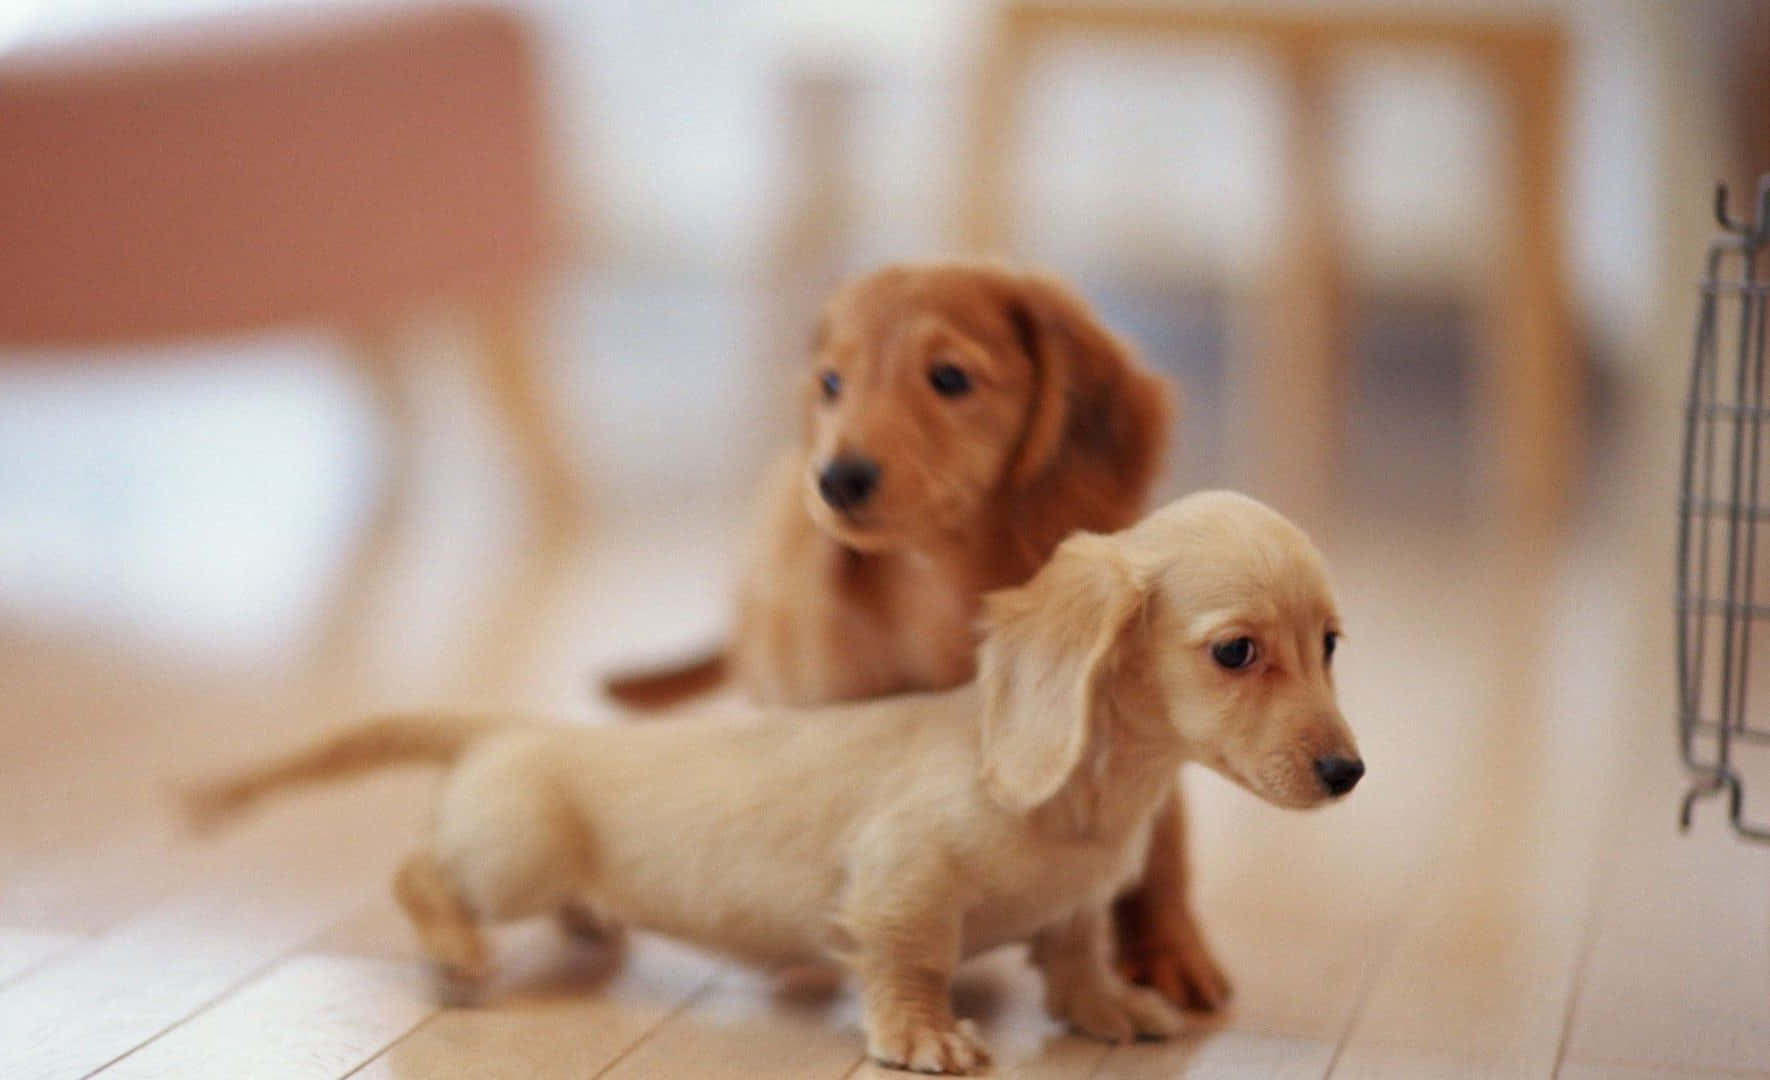 Two Small Dogs Standing On A Wooden Floor